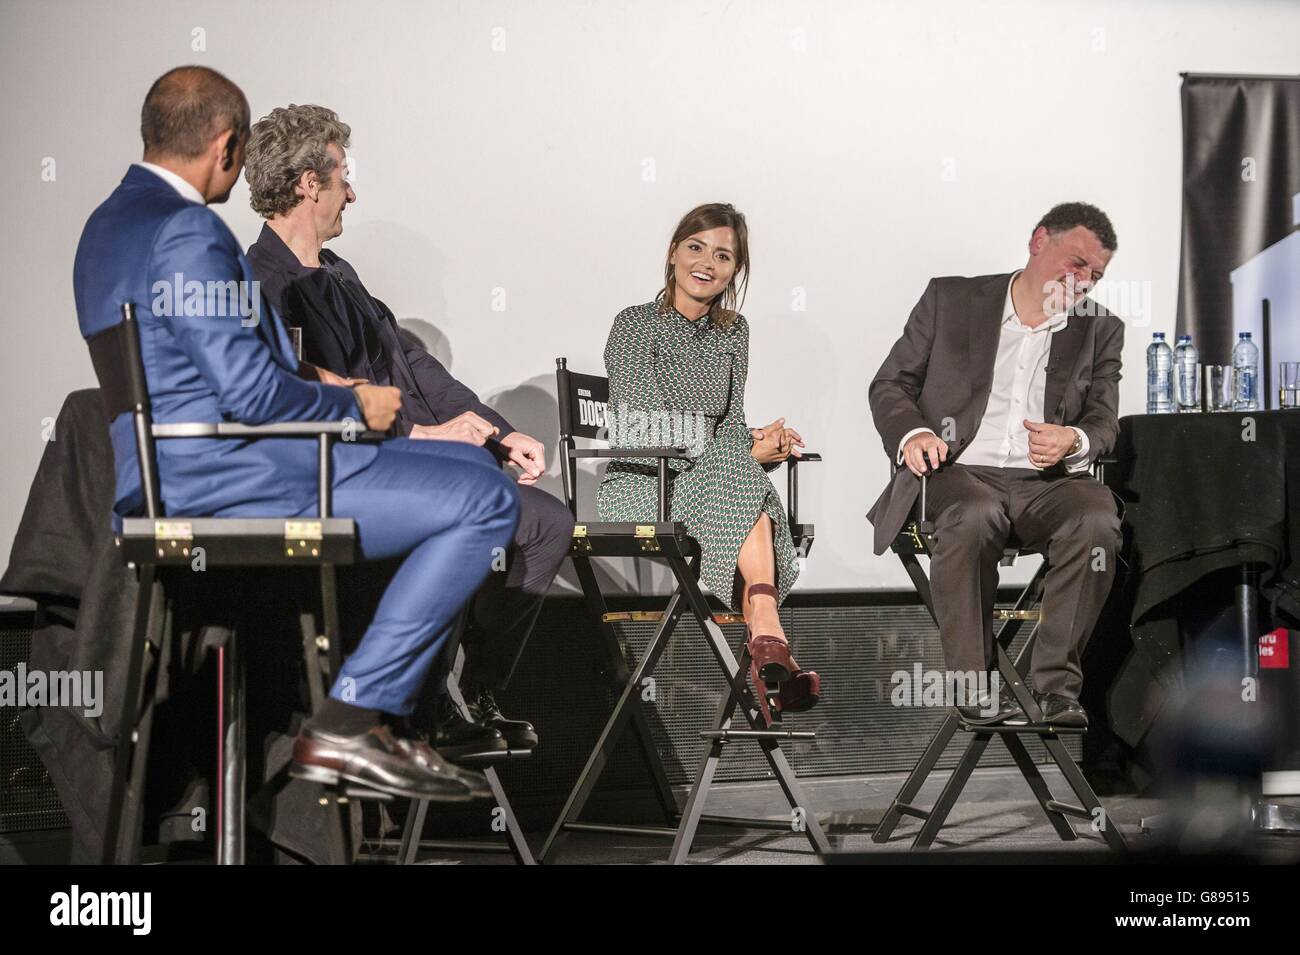 Cast of Doctor Who, Jenna Coleman and Peter Capaldi, plus writer Steven Moffat (right) answer questions from audience members at Cineworld in Cardiff, where episodes for the new Dr Who series are being screened. Stock Photo